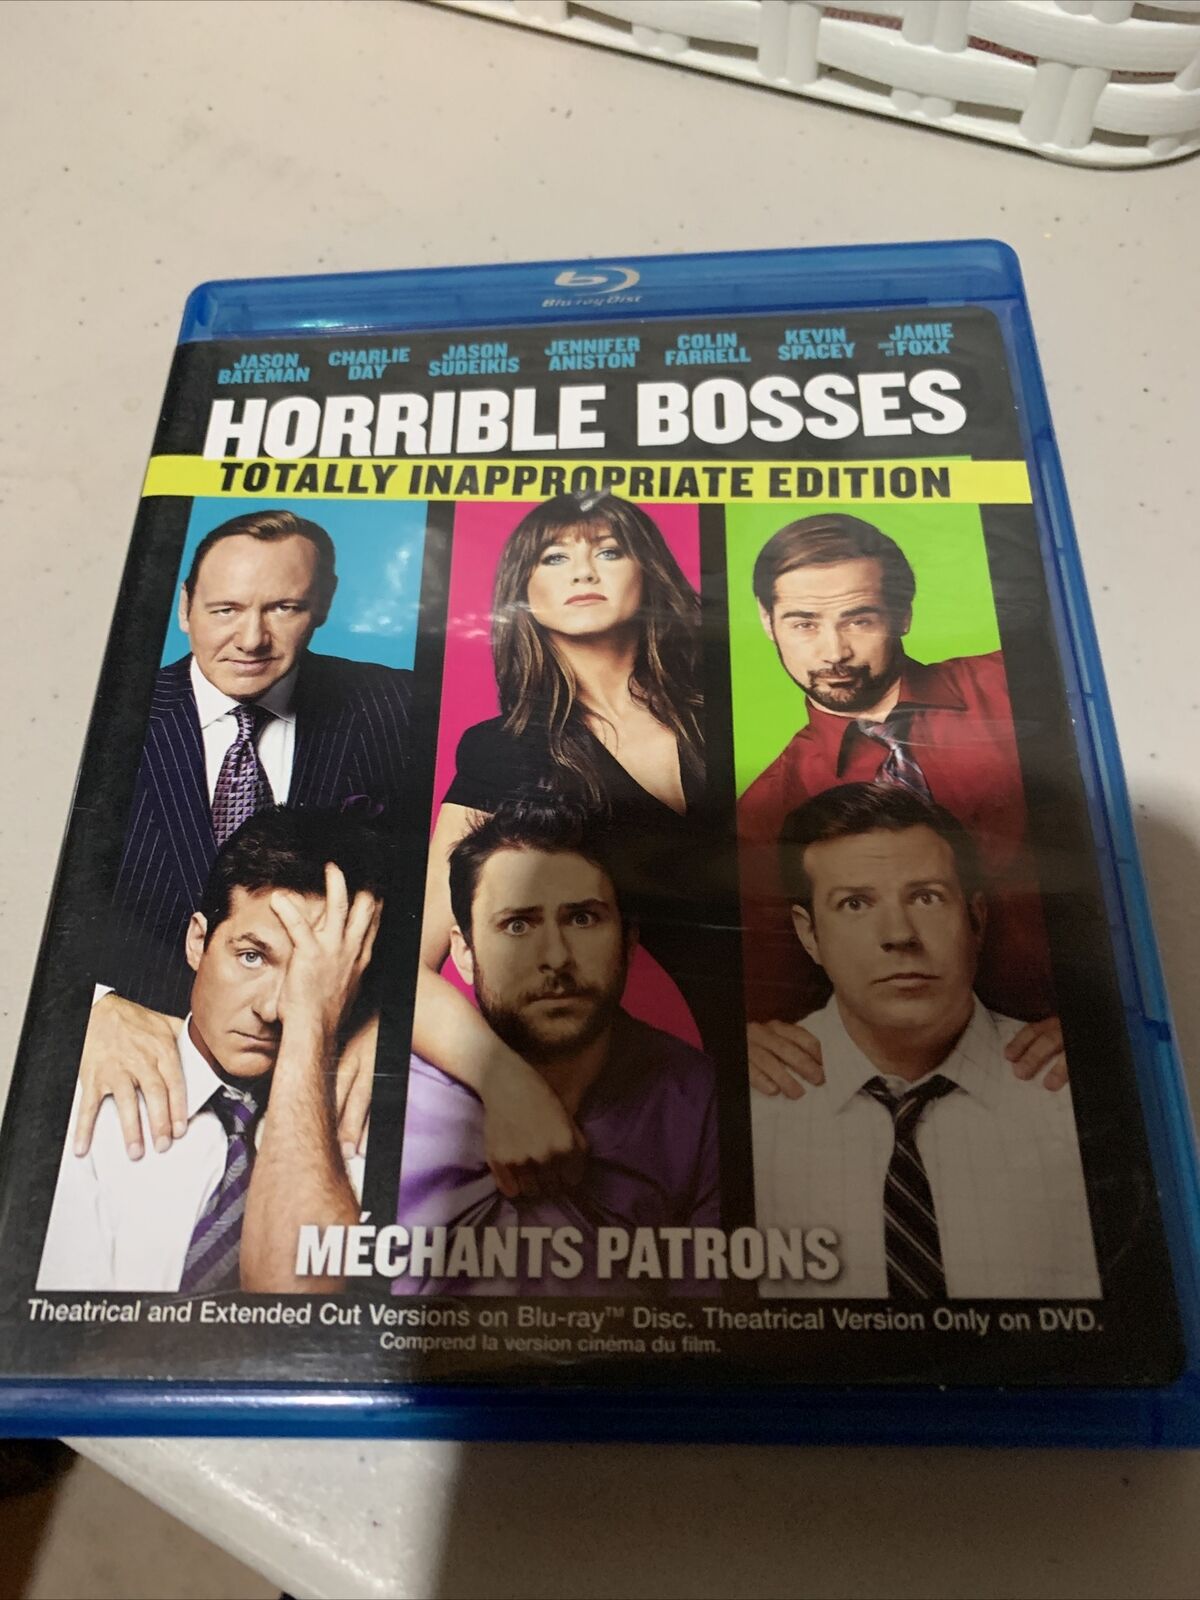 Horrible Bosses (Blu-ray Disc, 2011, Canadian Totally Inappropriate Edition)